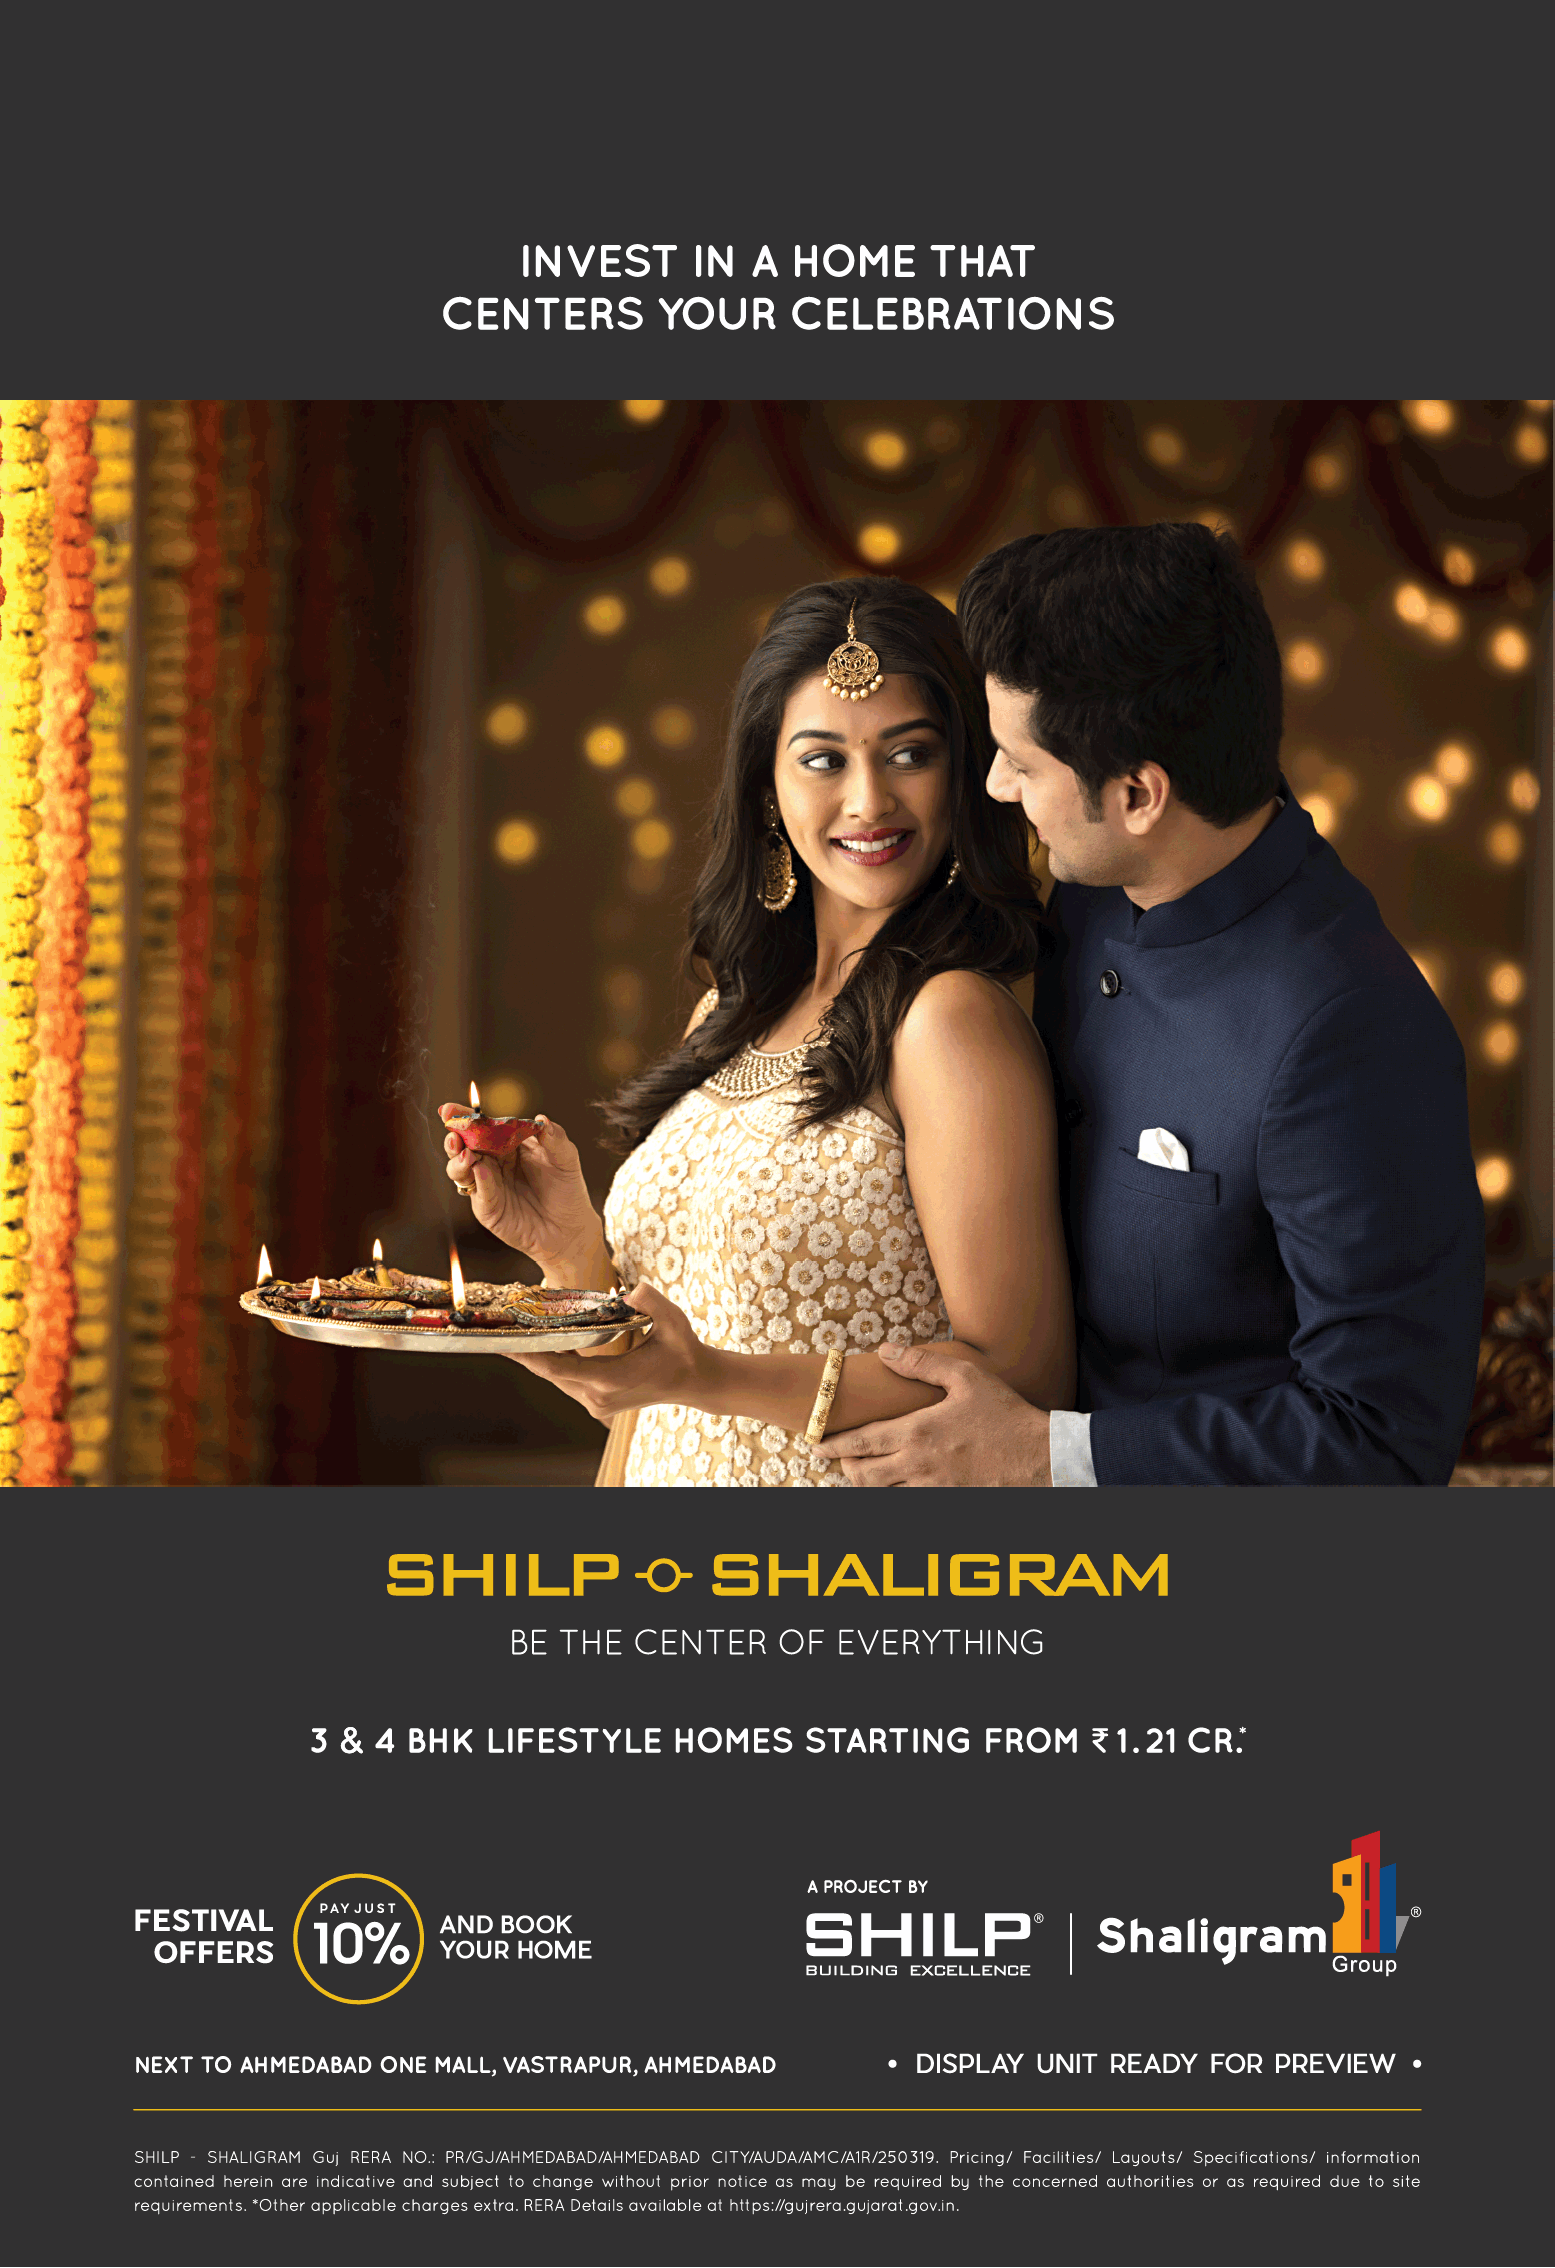 Book 3/4 BHK lifestyle homes Rs 1.21 Cr at Shilp Shaligram in Ahmedabad